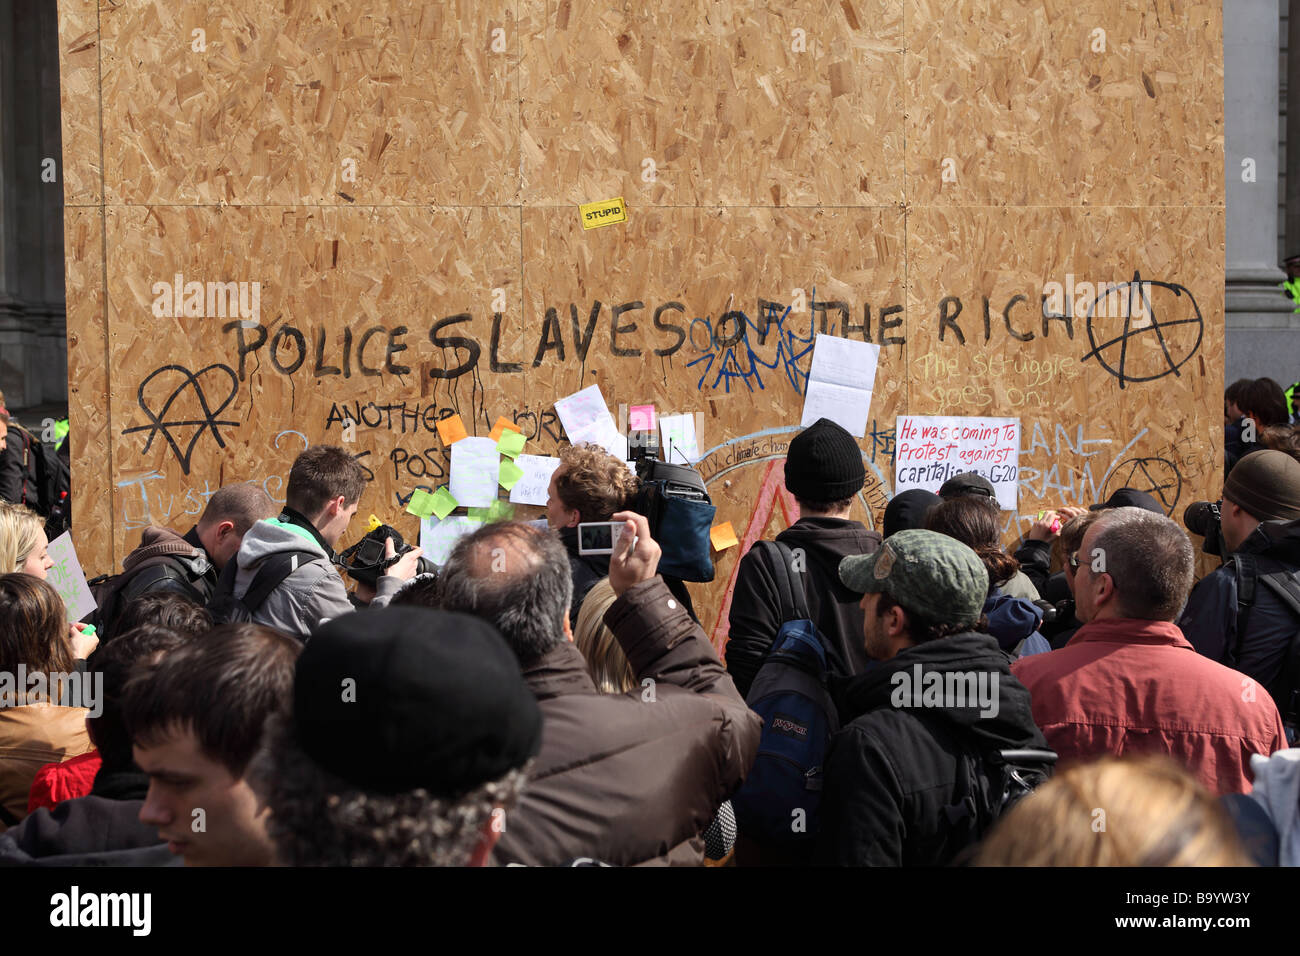 Protesters posting messages on a board outside the Bank of England during the 2009 G20 summit, London, UK. Stock Photo